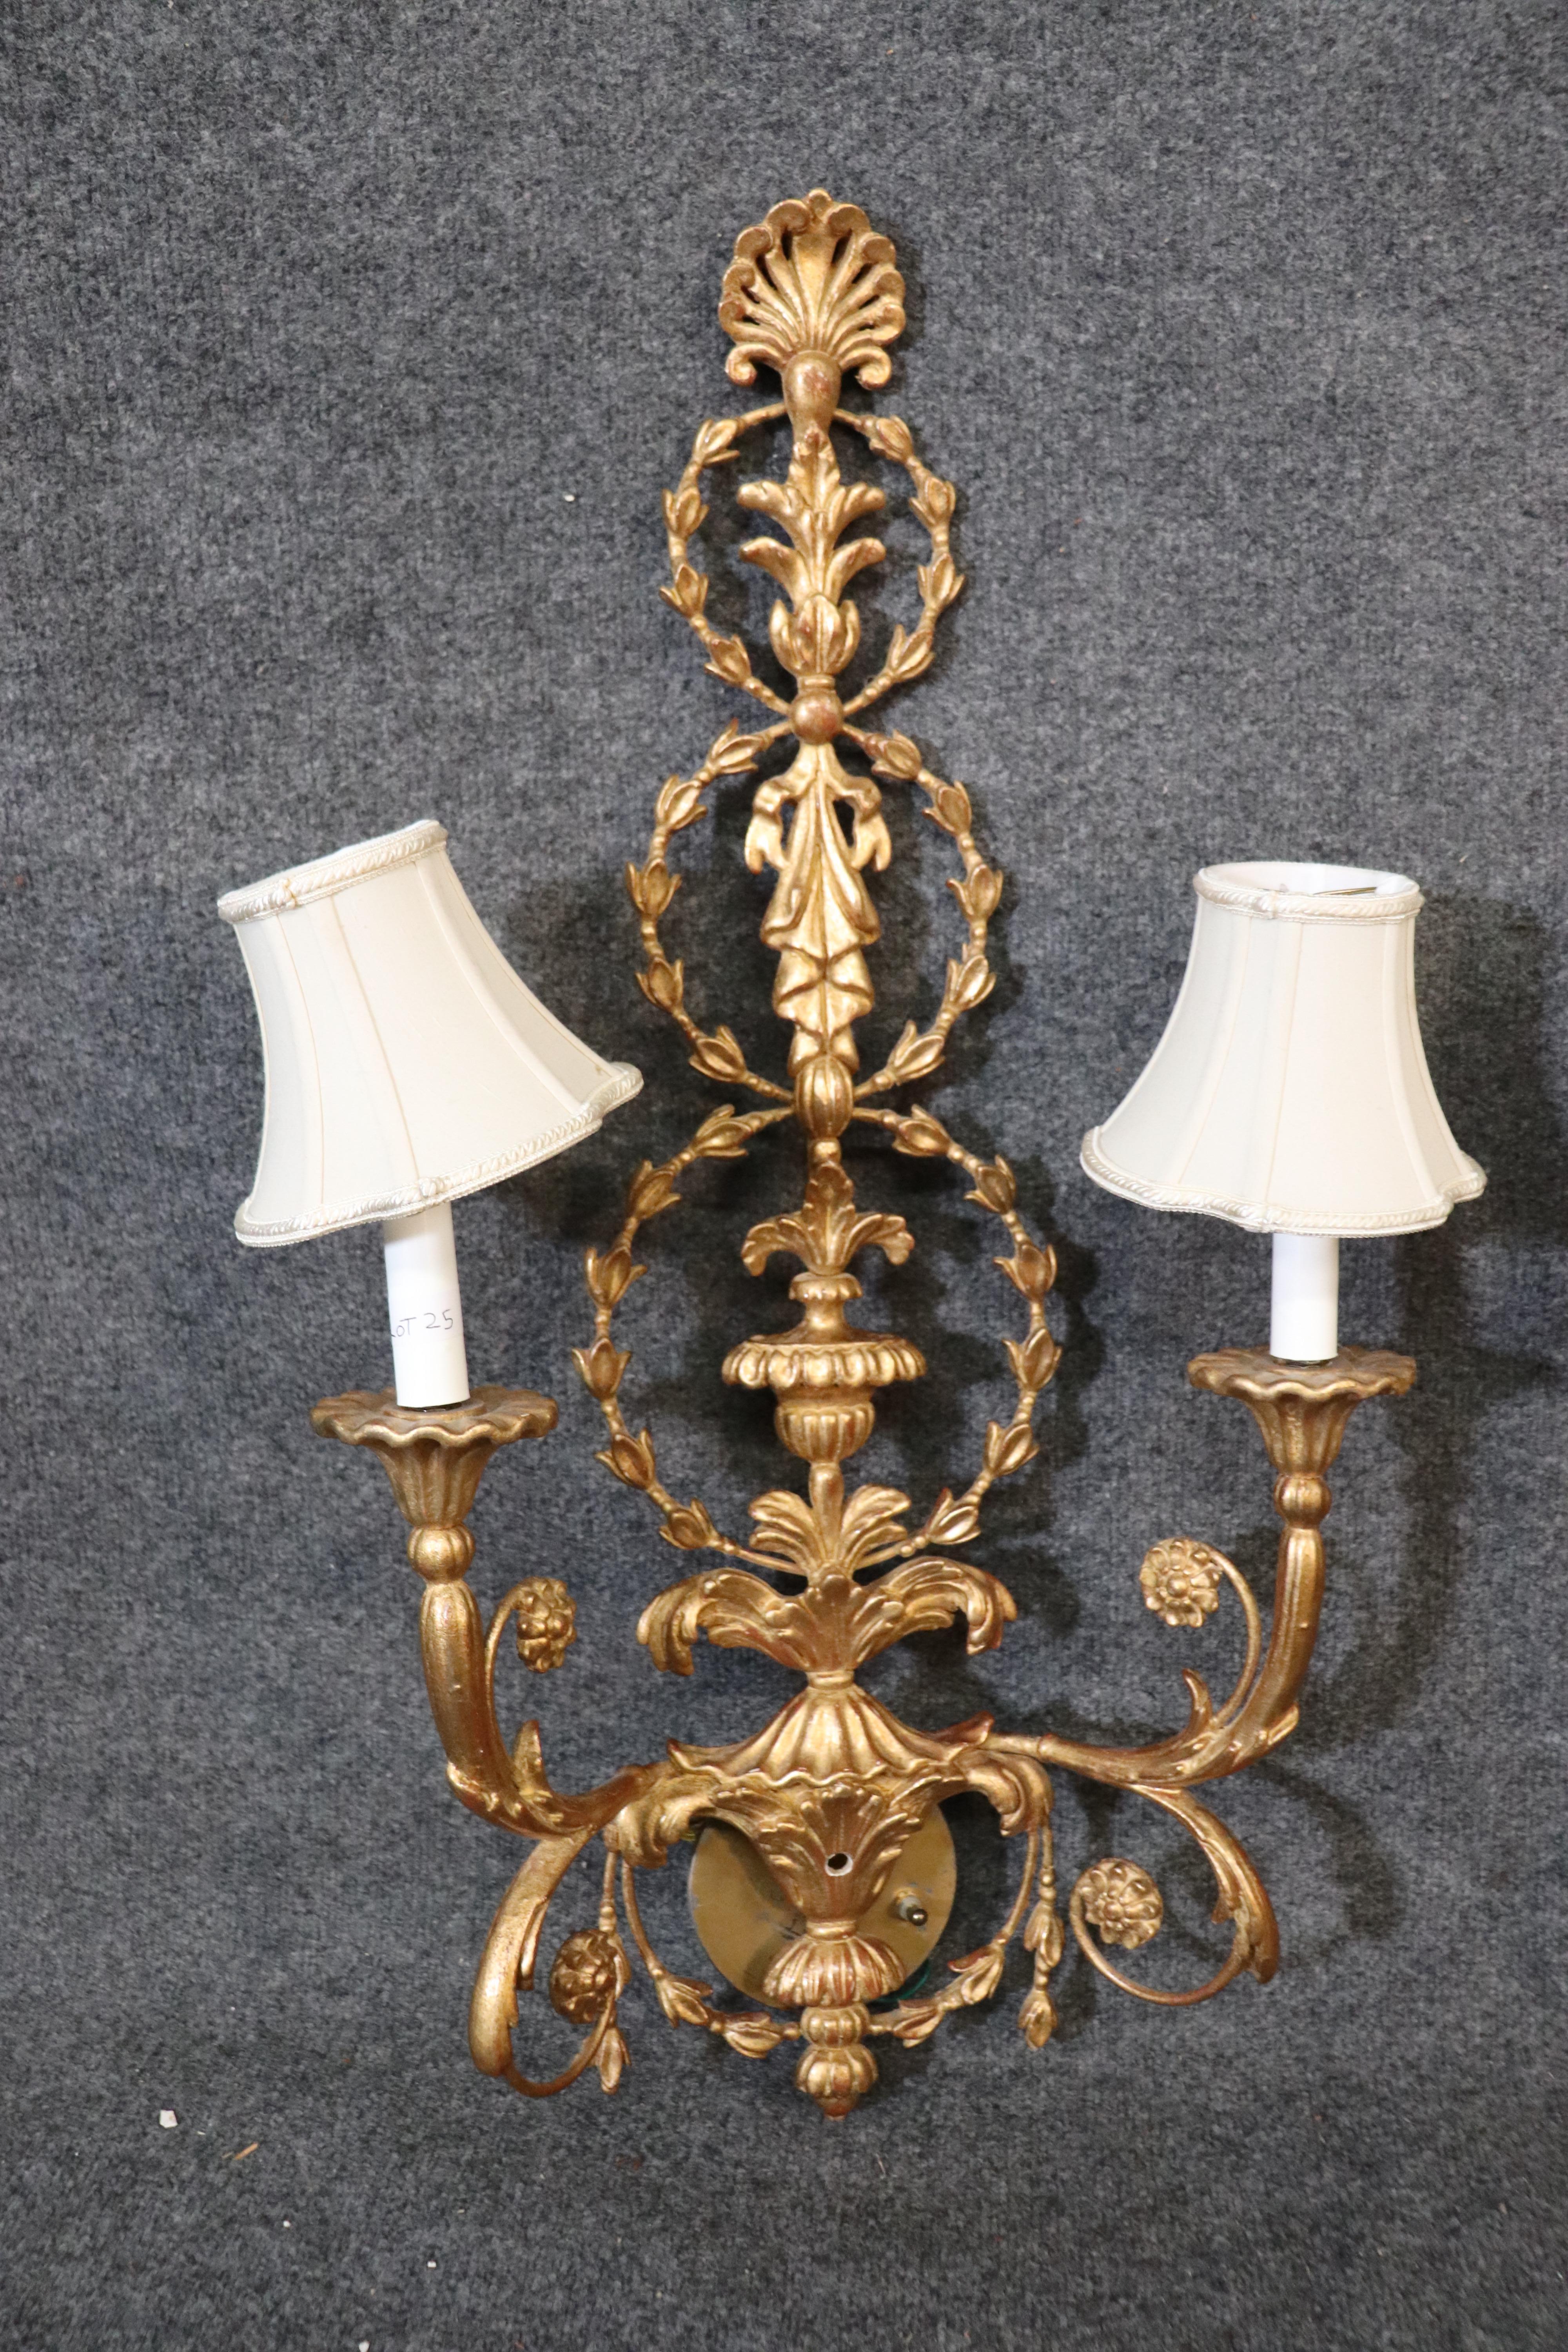 Beautiful paid of tall sconces. Measure 33 tall x 19 wide x 9 inches deep.